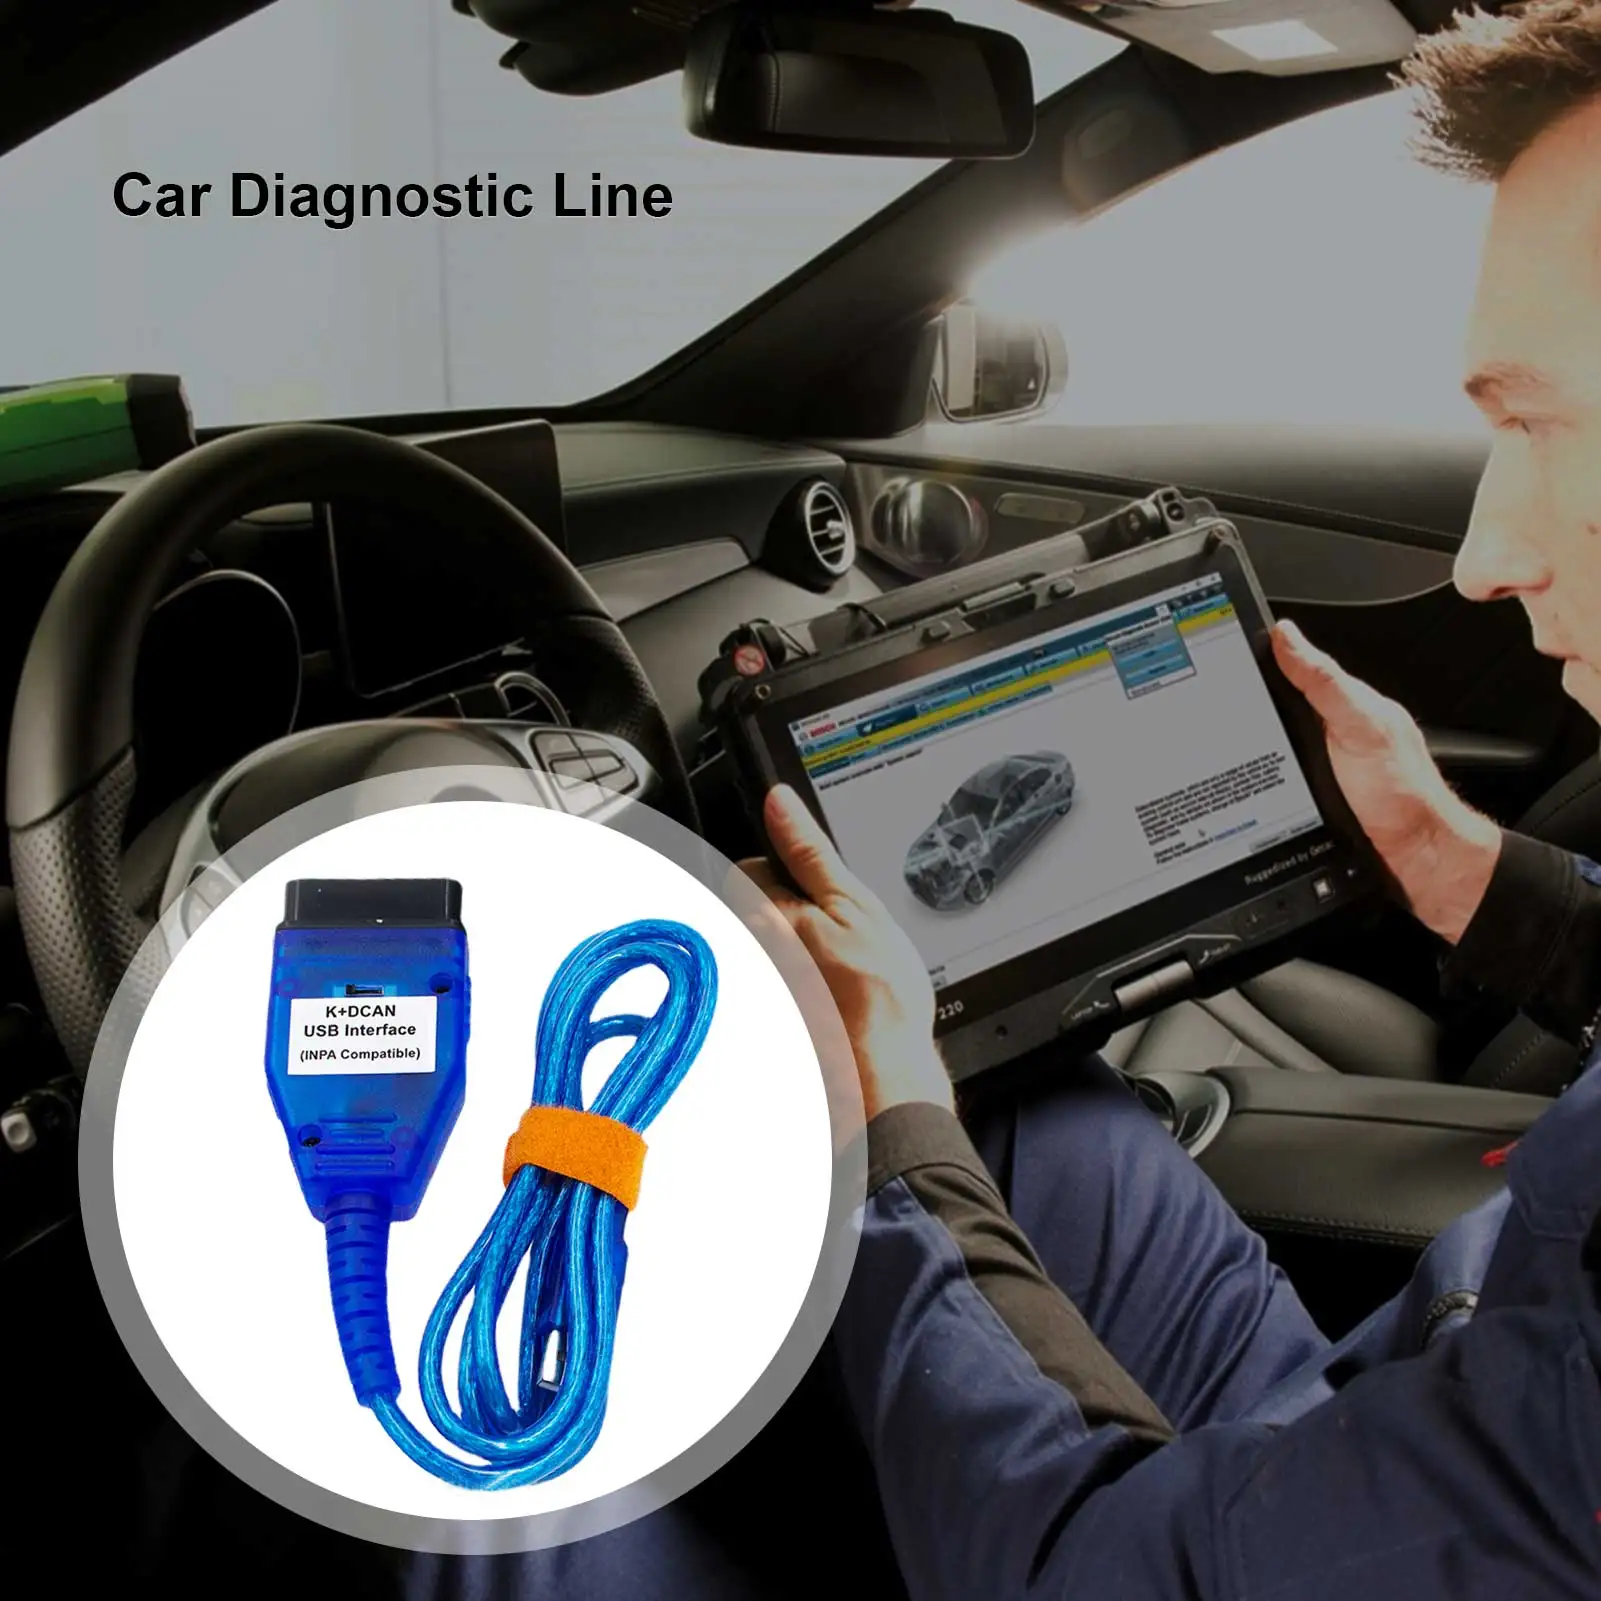 

Car Diagnostic Cable Blue FoUSB FT232 With Switch Allows Auto Scanner Full Diagnostic For From 1998 To 2013 Read Delete Errors